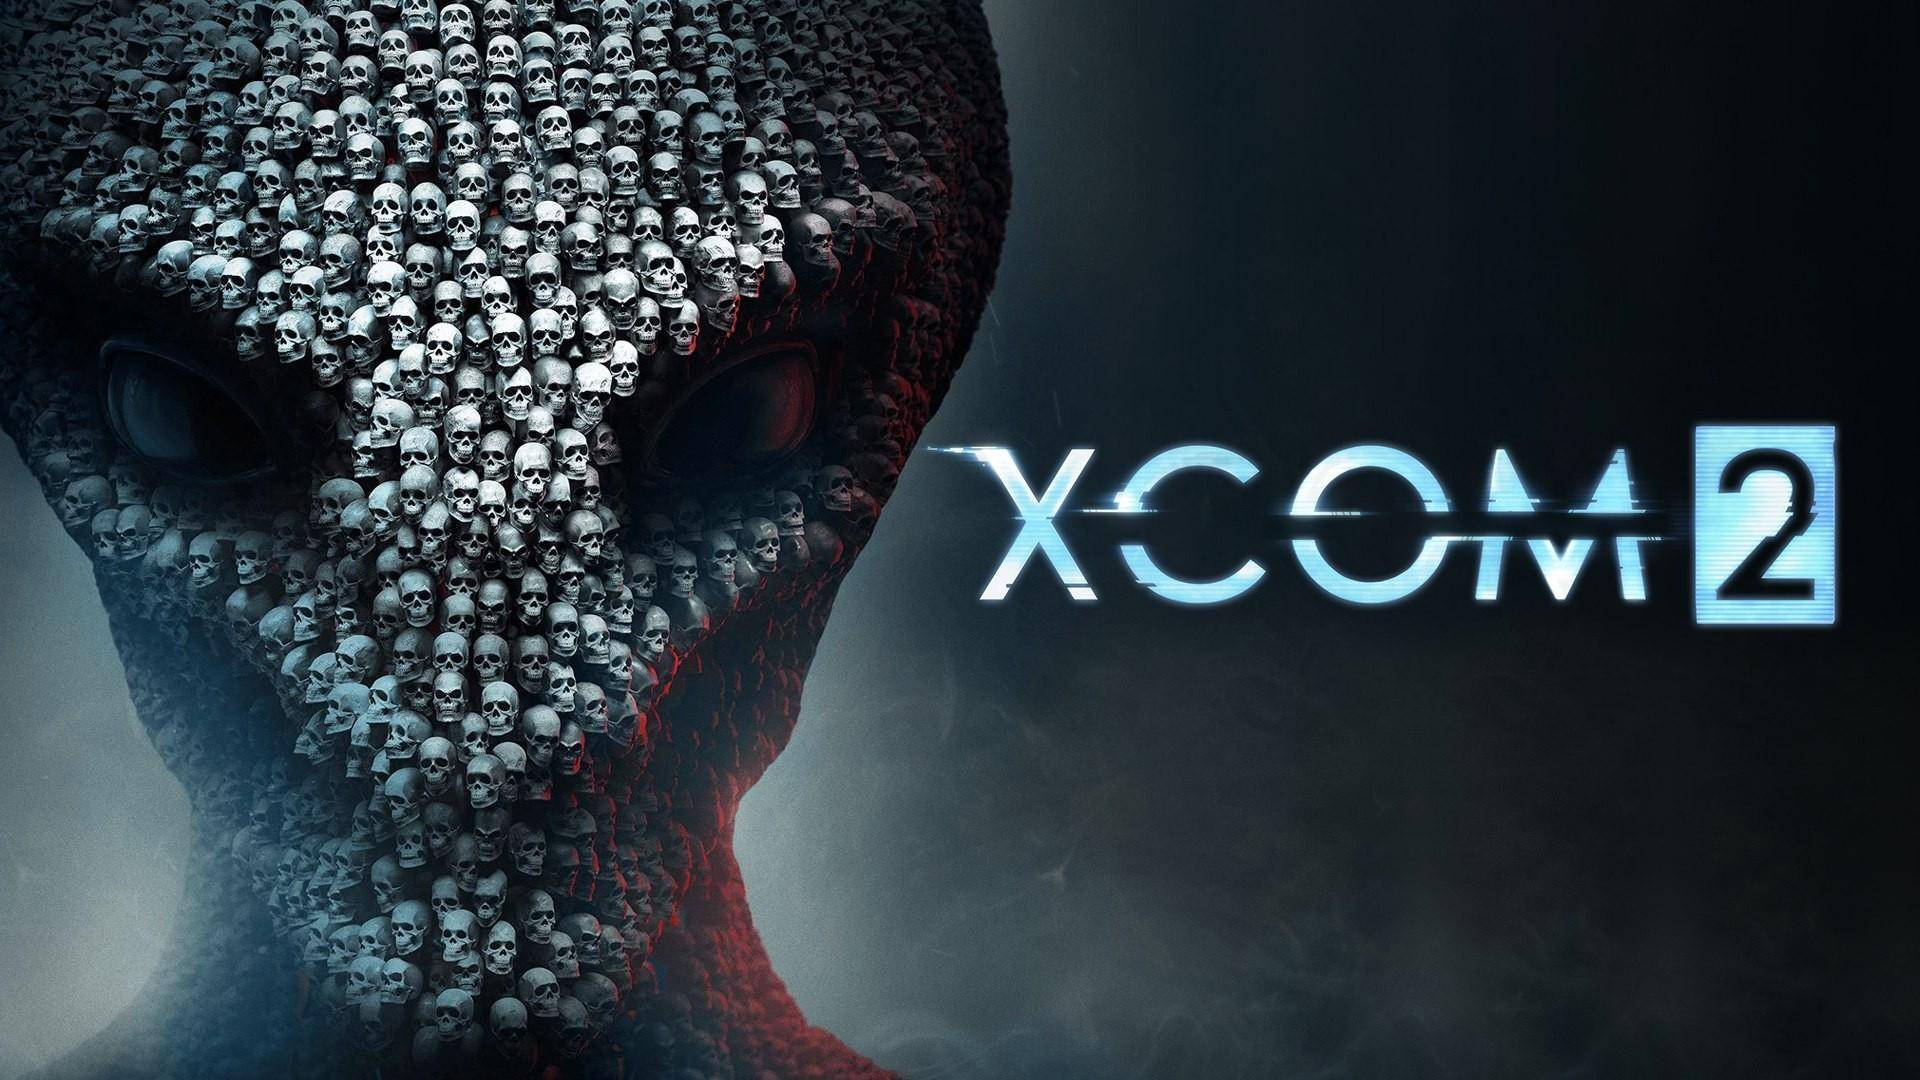 XCOM 2 is free to play for a week